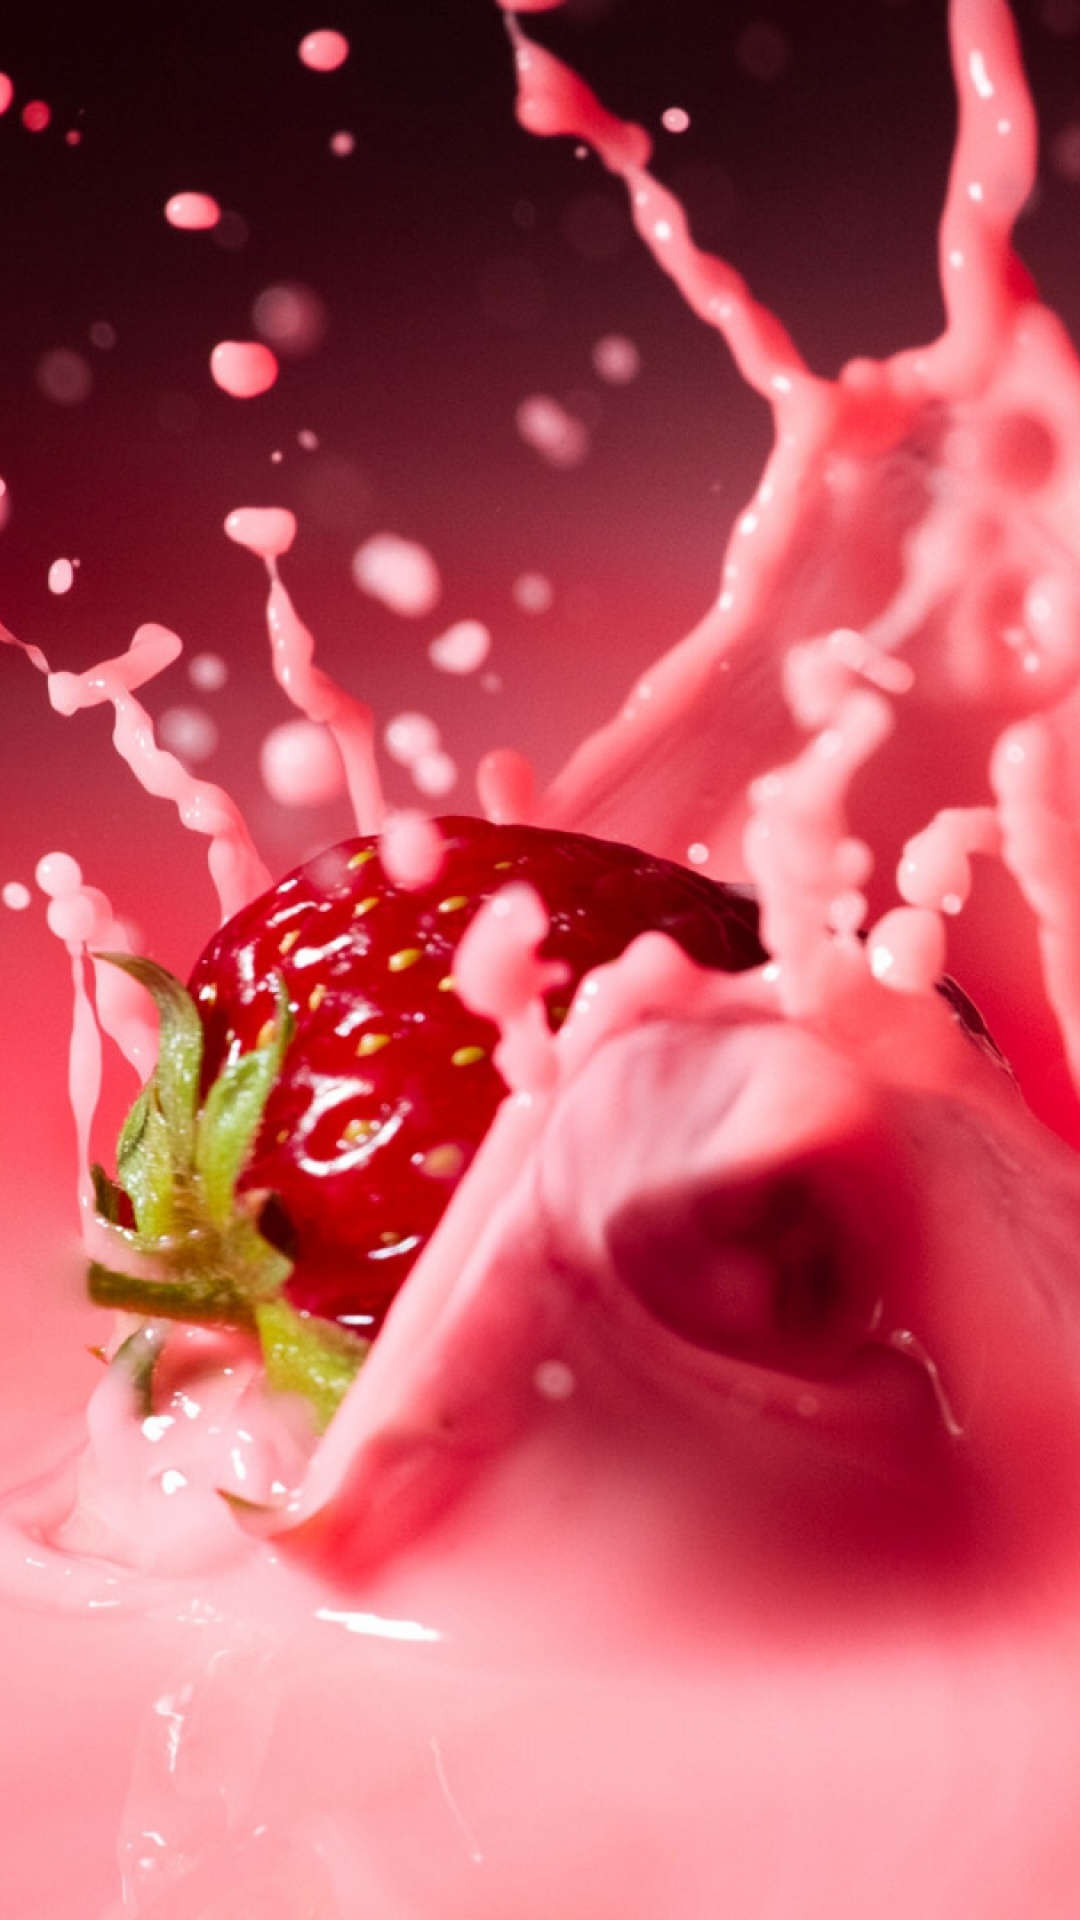 Red Strawberry in Pink Water. Wallpaper in 1080x1920 Resolution